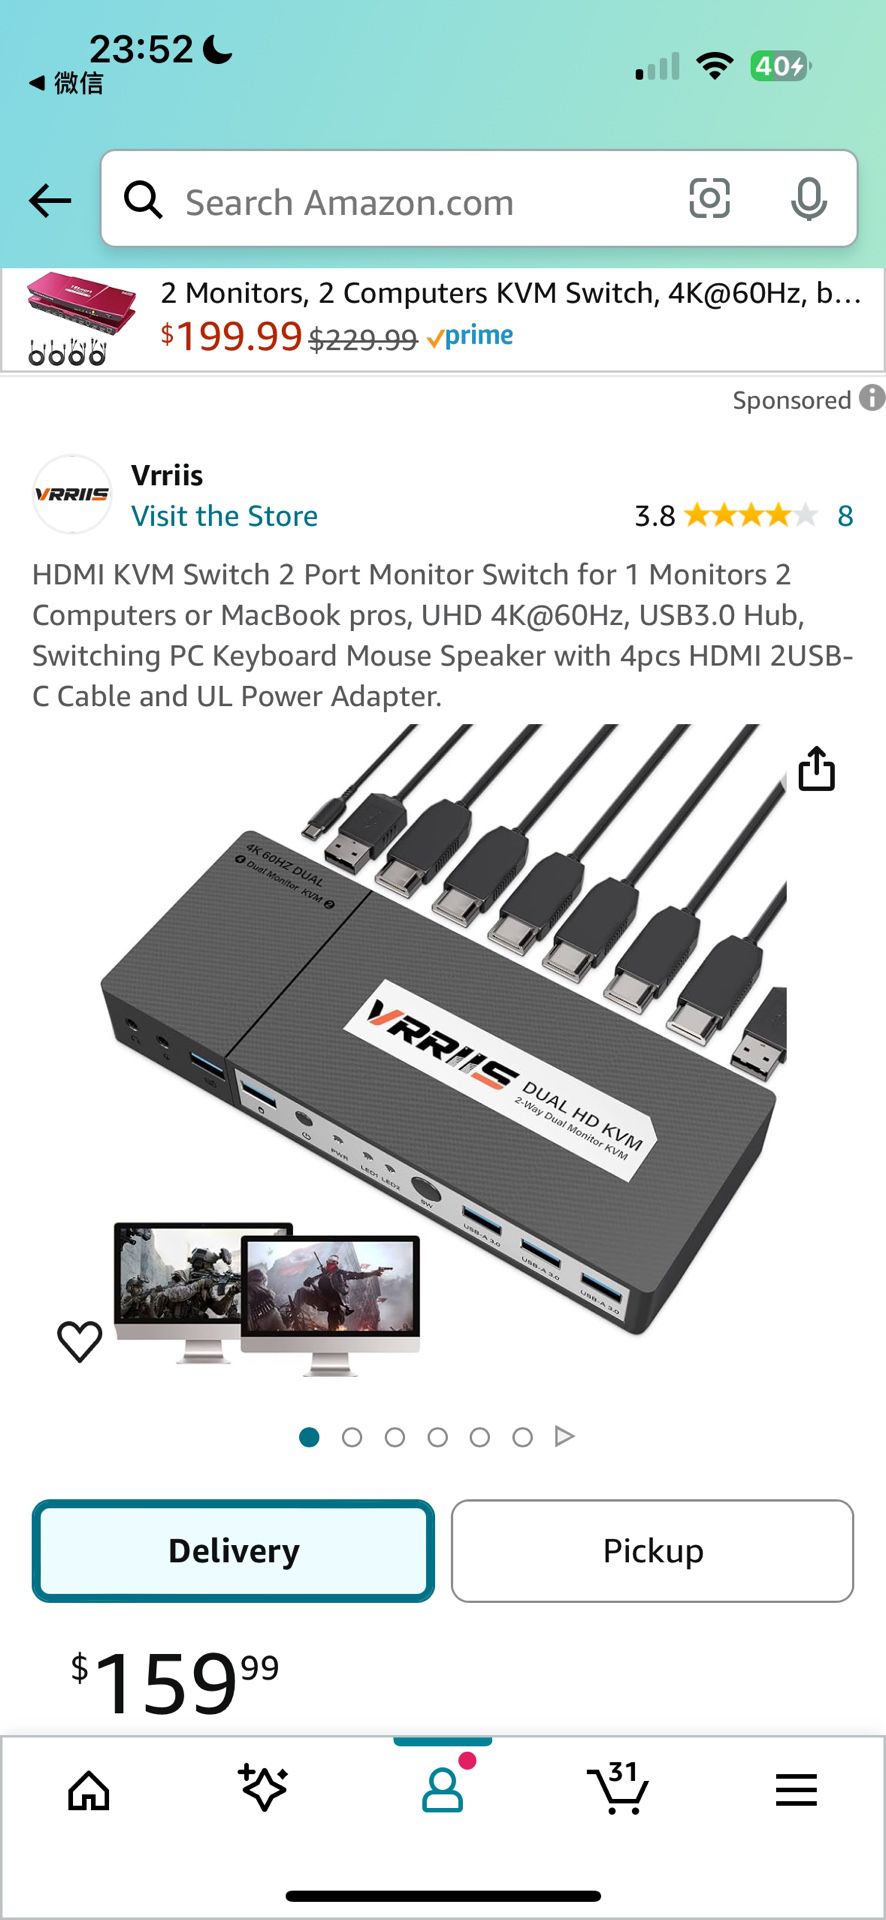 HDMI KVM Switch 2 Port Monitor Switch for 1 Monitors 2 Computers or MacBook pros, UHD 4K@60Hz, USB3.0 Hub, Switching PC Keyboard Mouse Speaker with 4p